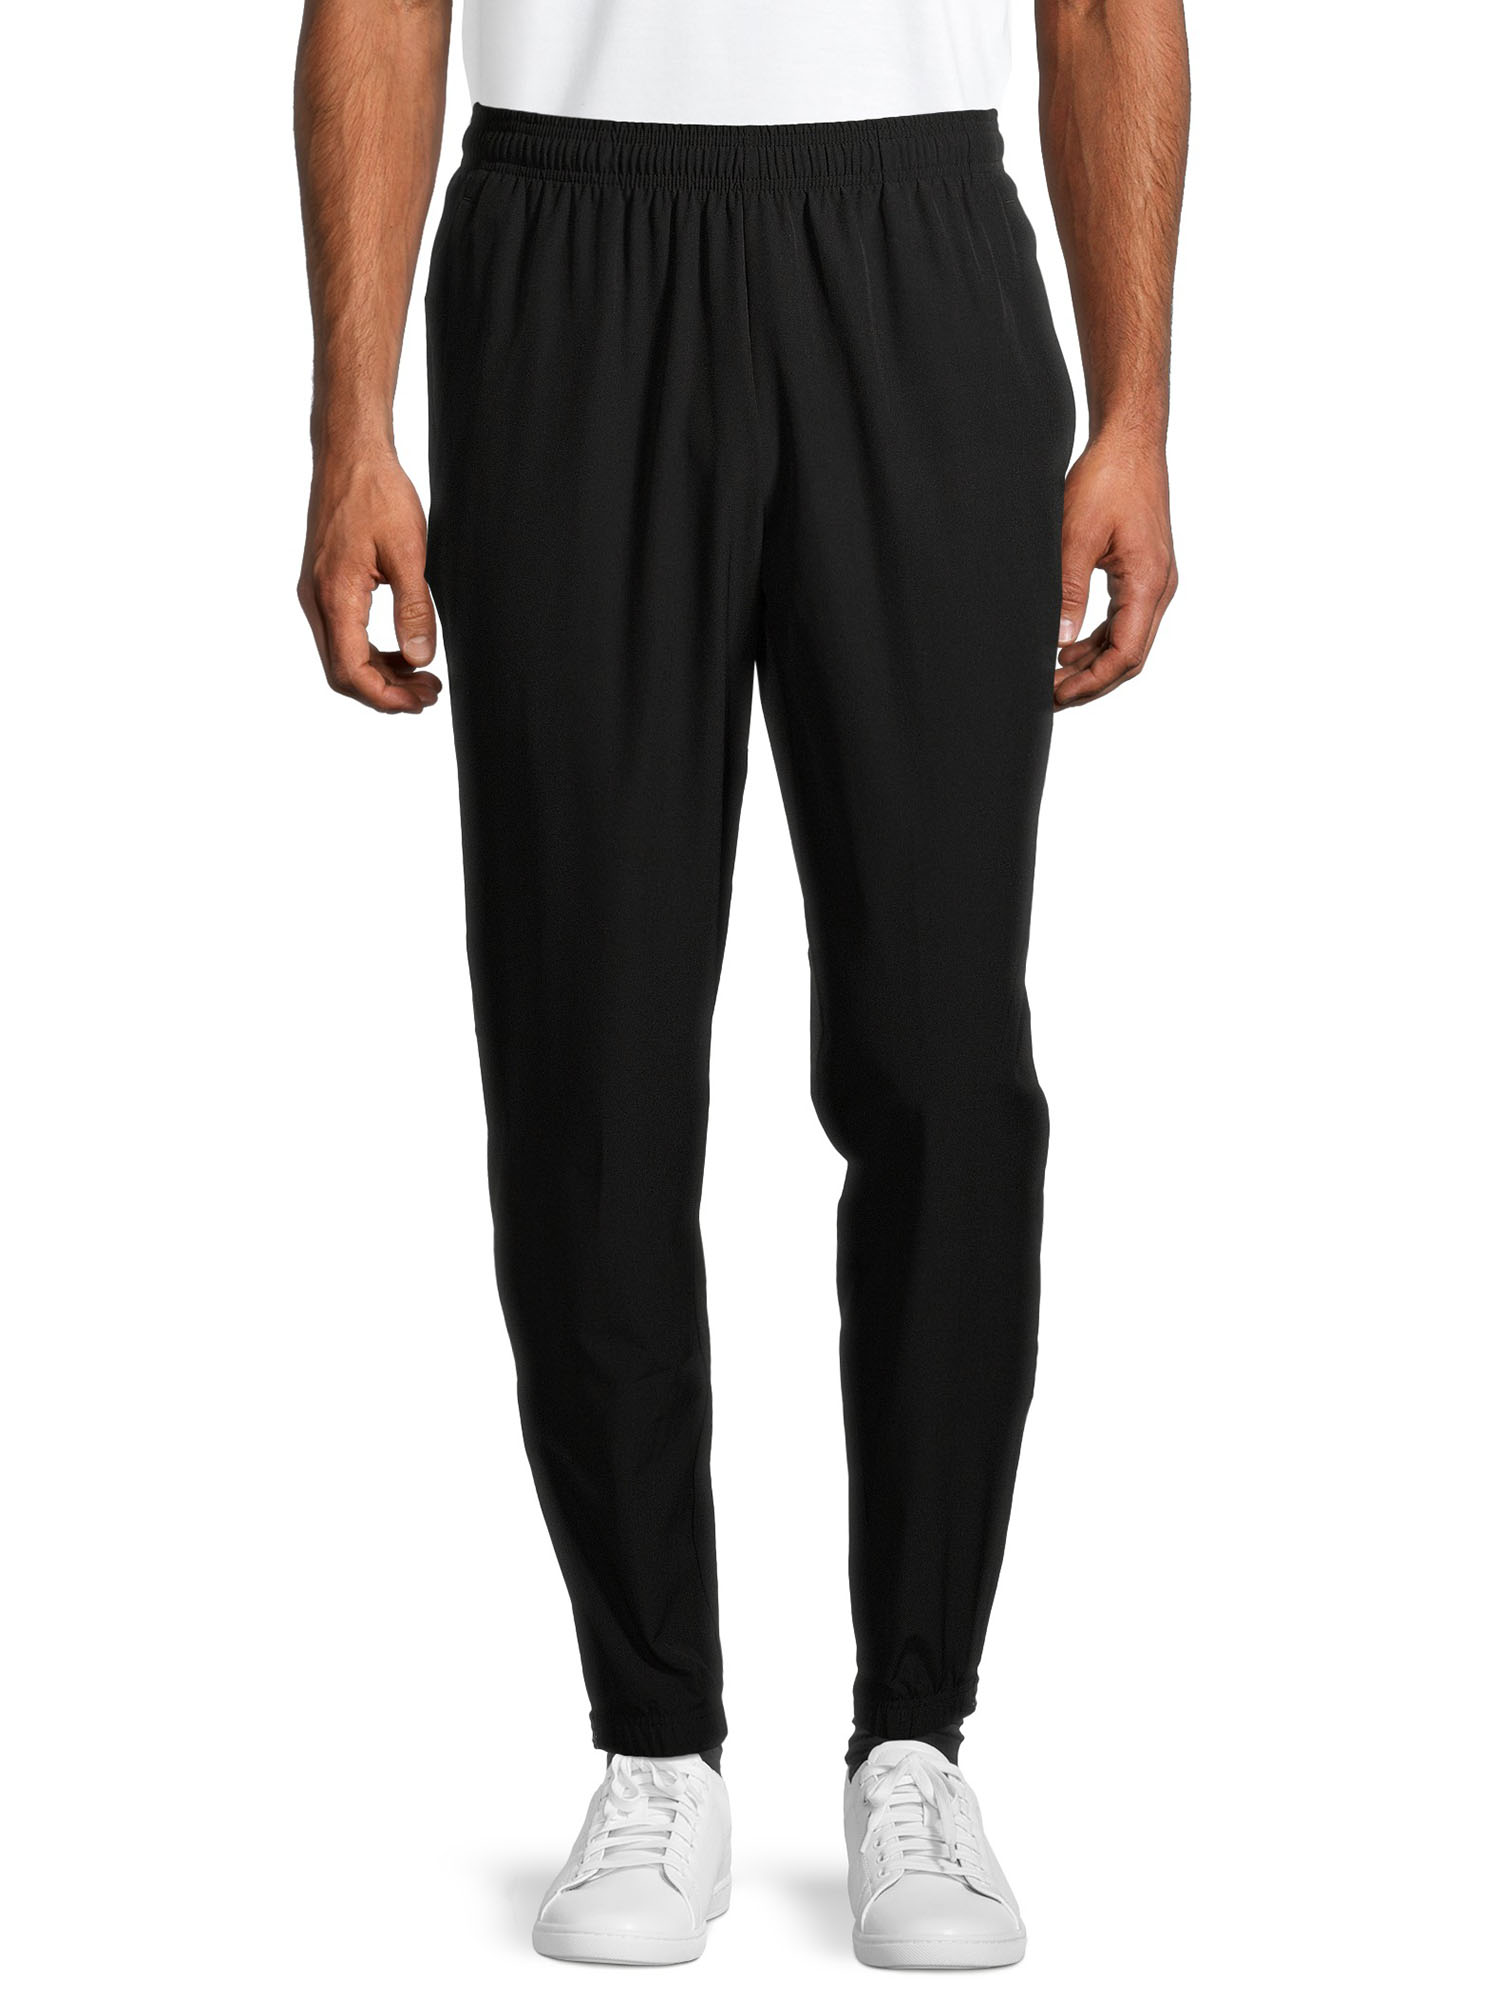 Russell Mens and Big Mens Active Woven Joggers - image 1 of 6